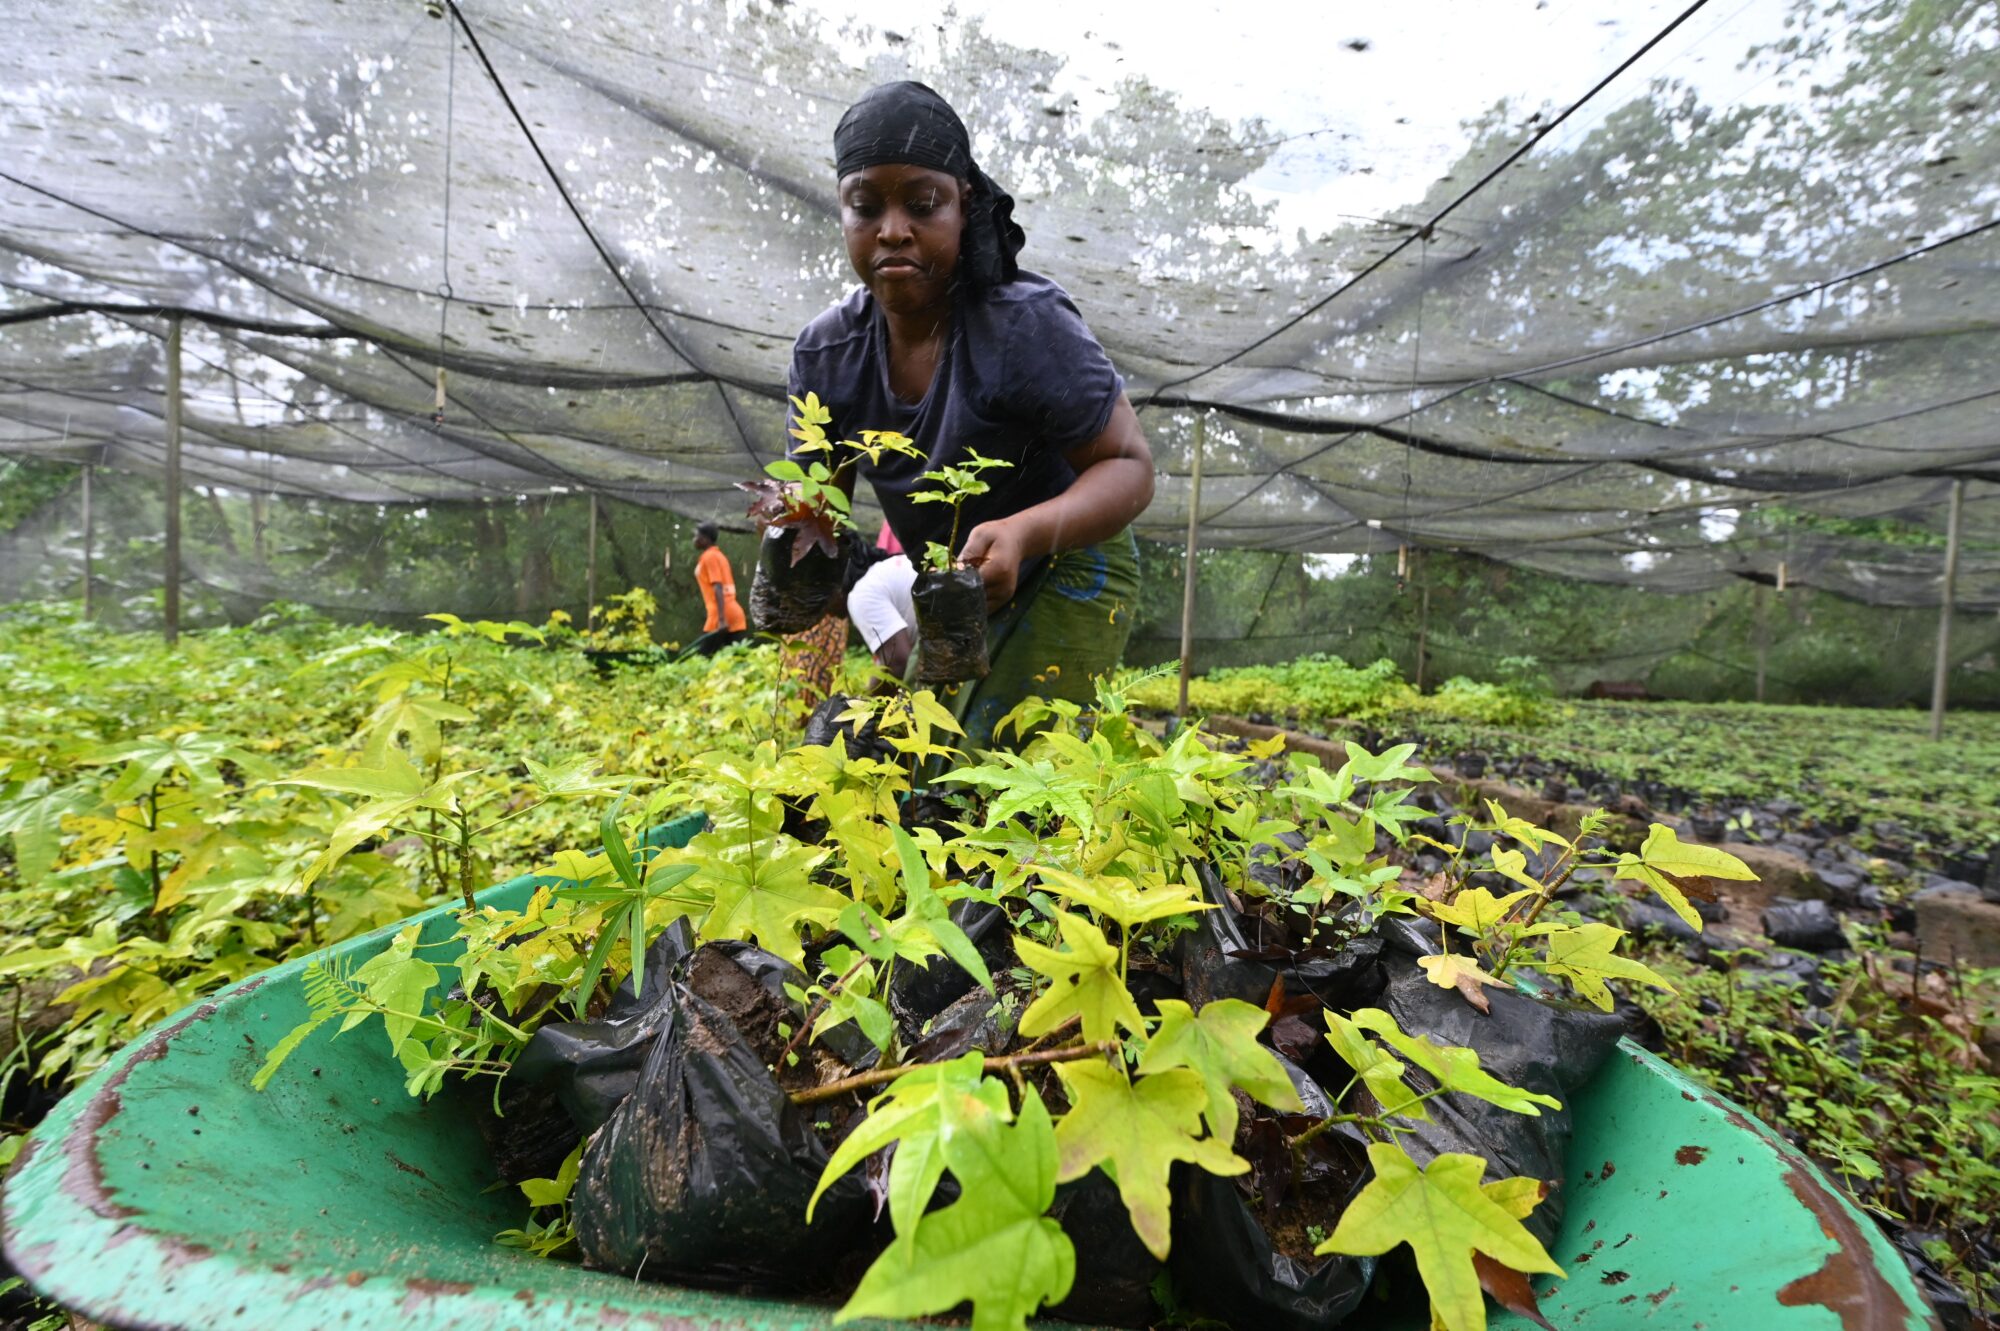 A person transferring two potted saplings to a bucket filled with similar saplings, inside a large netted garden area.